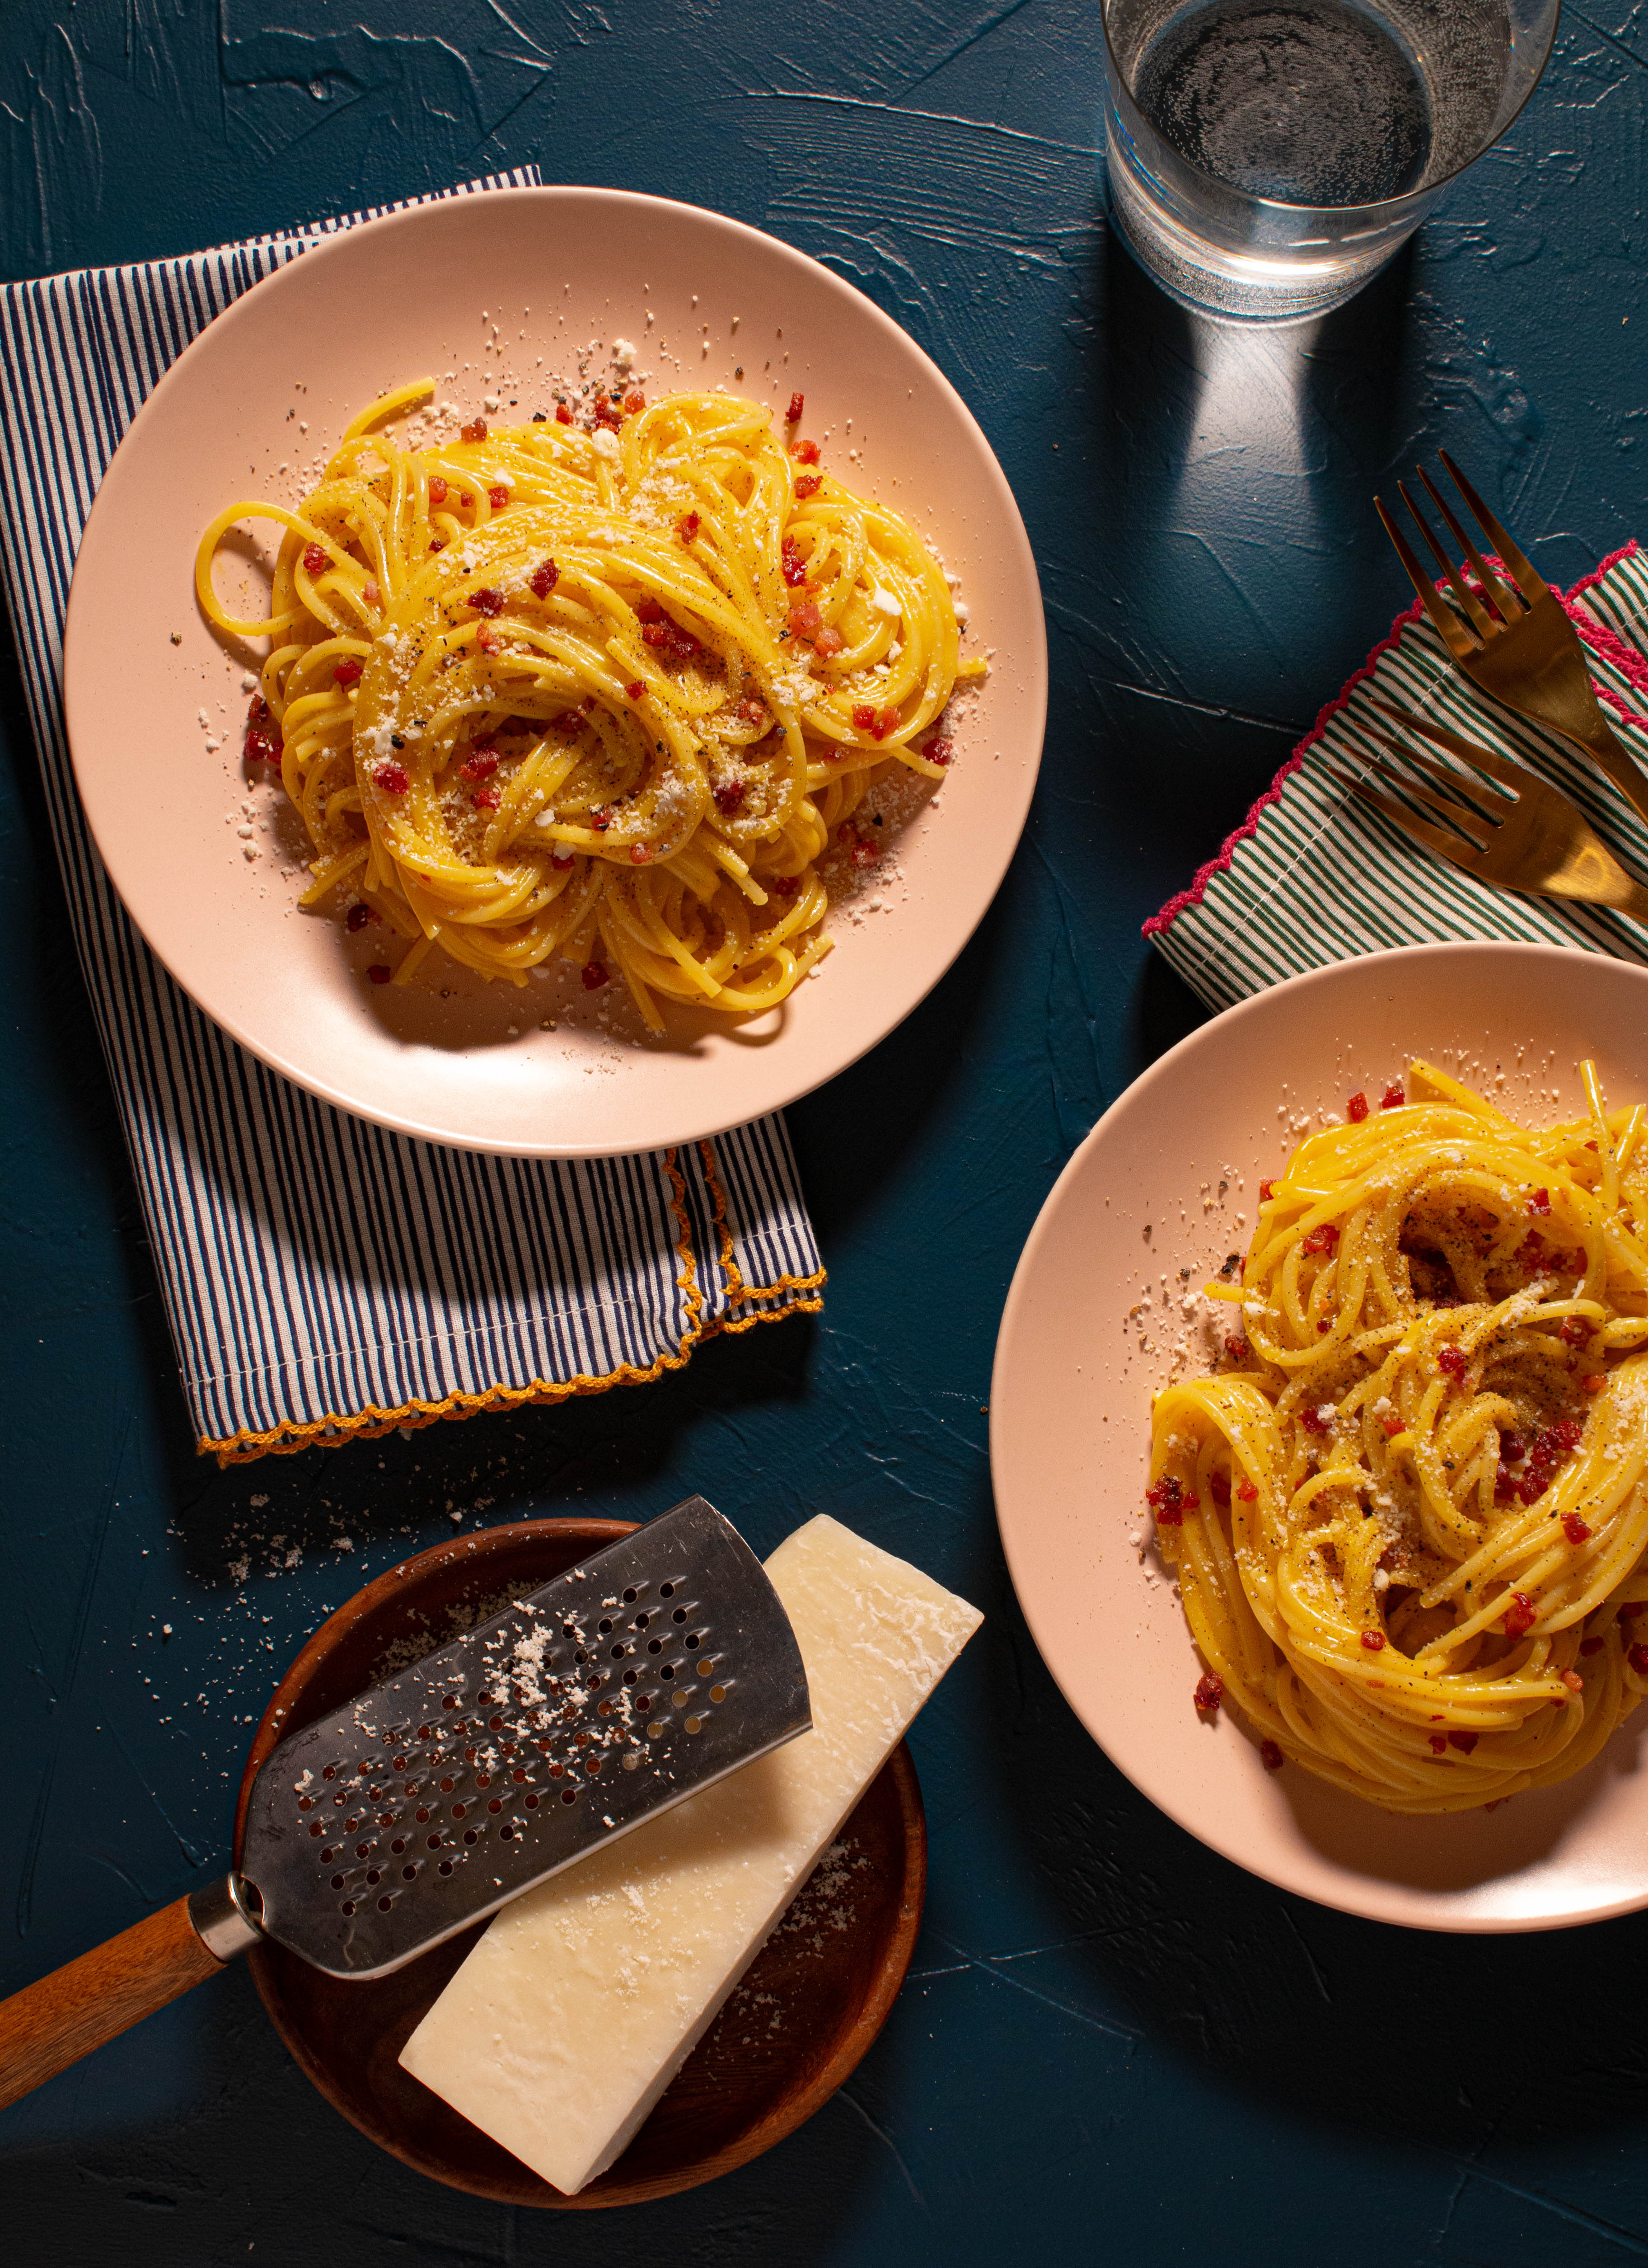 Swirls of spaghetti carbonara on blush pink plates atop a navy surface with a wedge of pecorino and grater.